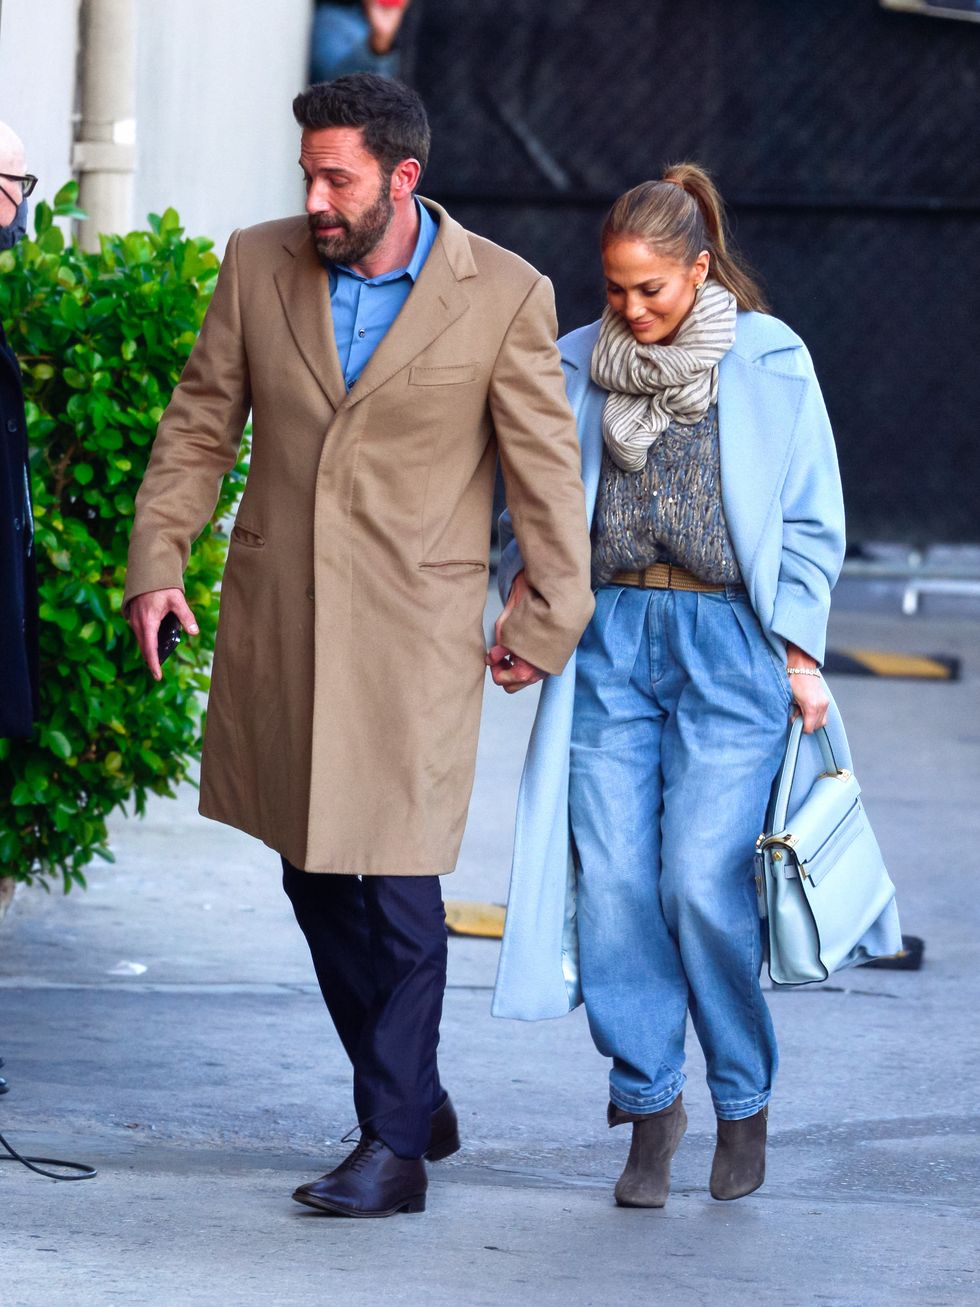 los angeles, ca   december 15 ben affleck and jennifer lopez are seen arriving at 'jimmy kimmel live' show on december 15, 2021 in los angeles, california  photo by jocebauer griffingc images